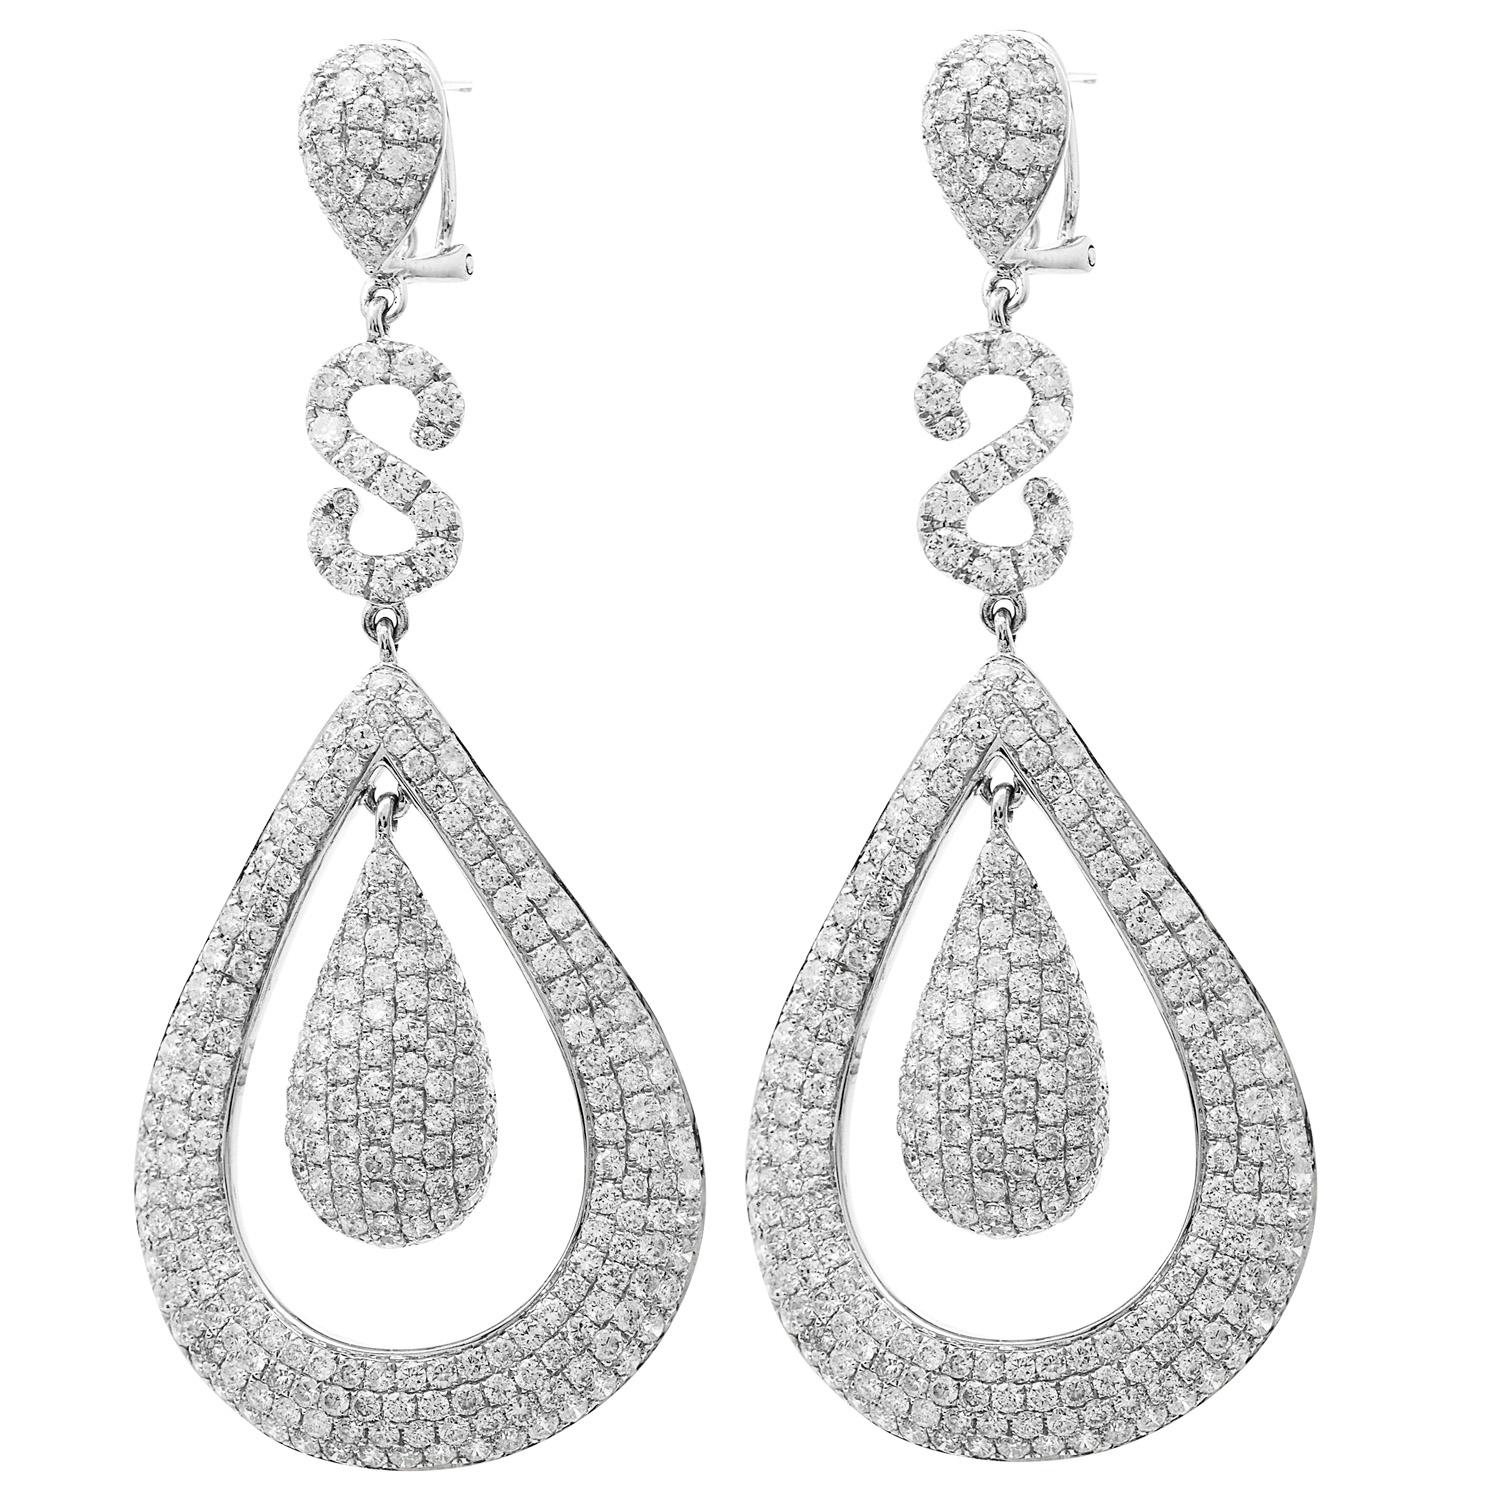 Feel like a Princess! 

Let the sparkle dazzle everyone in the

room and live the true beauty of High-Quality Jewelry!
These Majestic earrings are crafted in 14K White and Yellow Gold. Set with approx. 11.22 carats of round natural diamond, set in